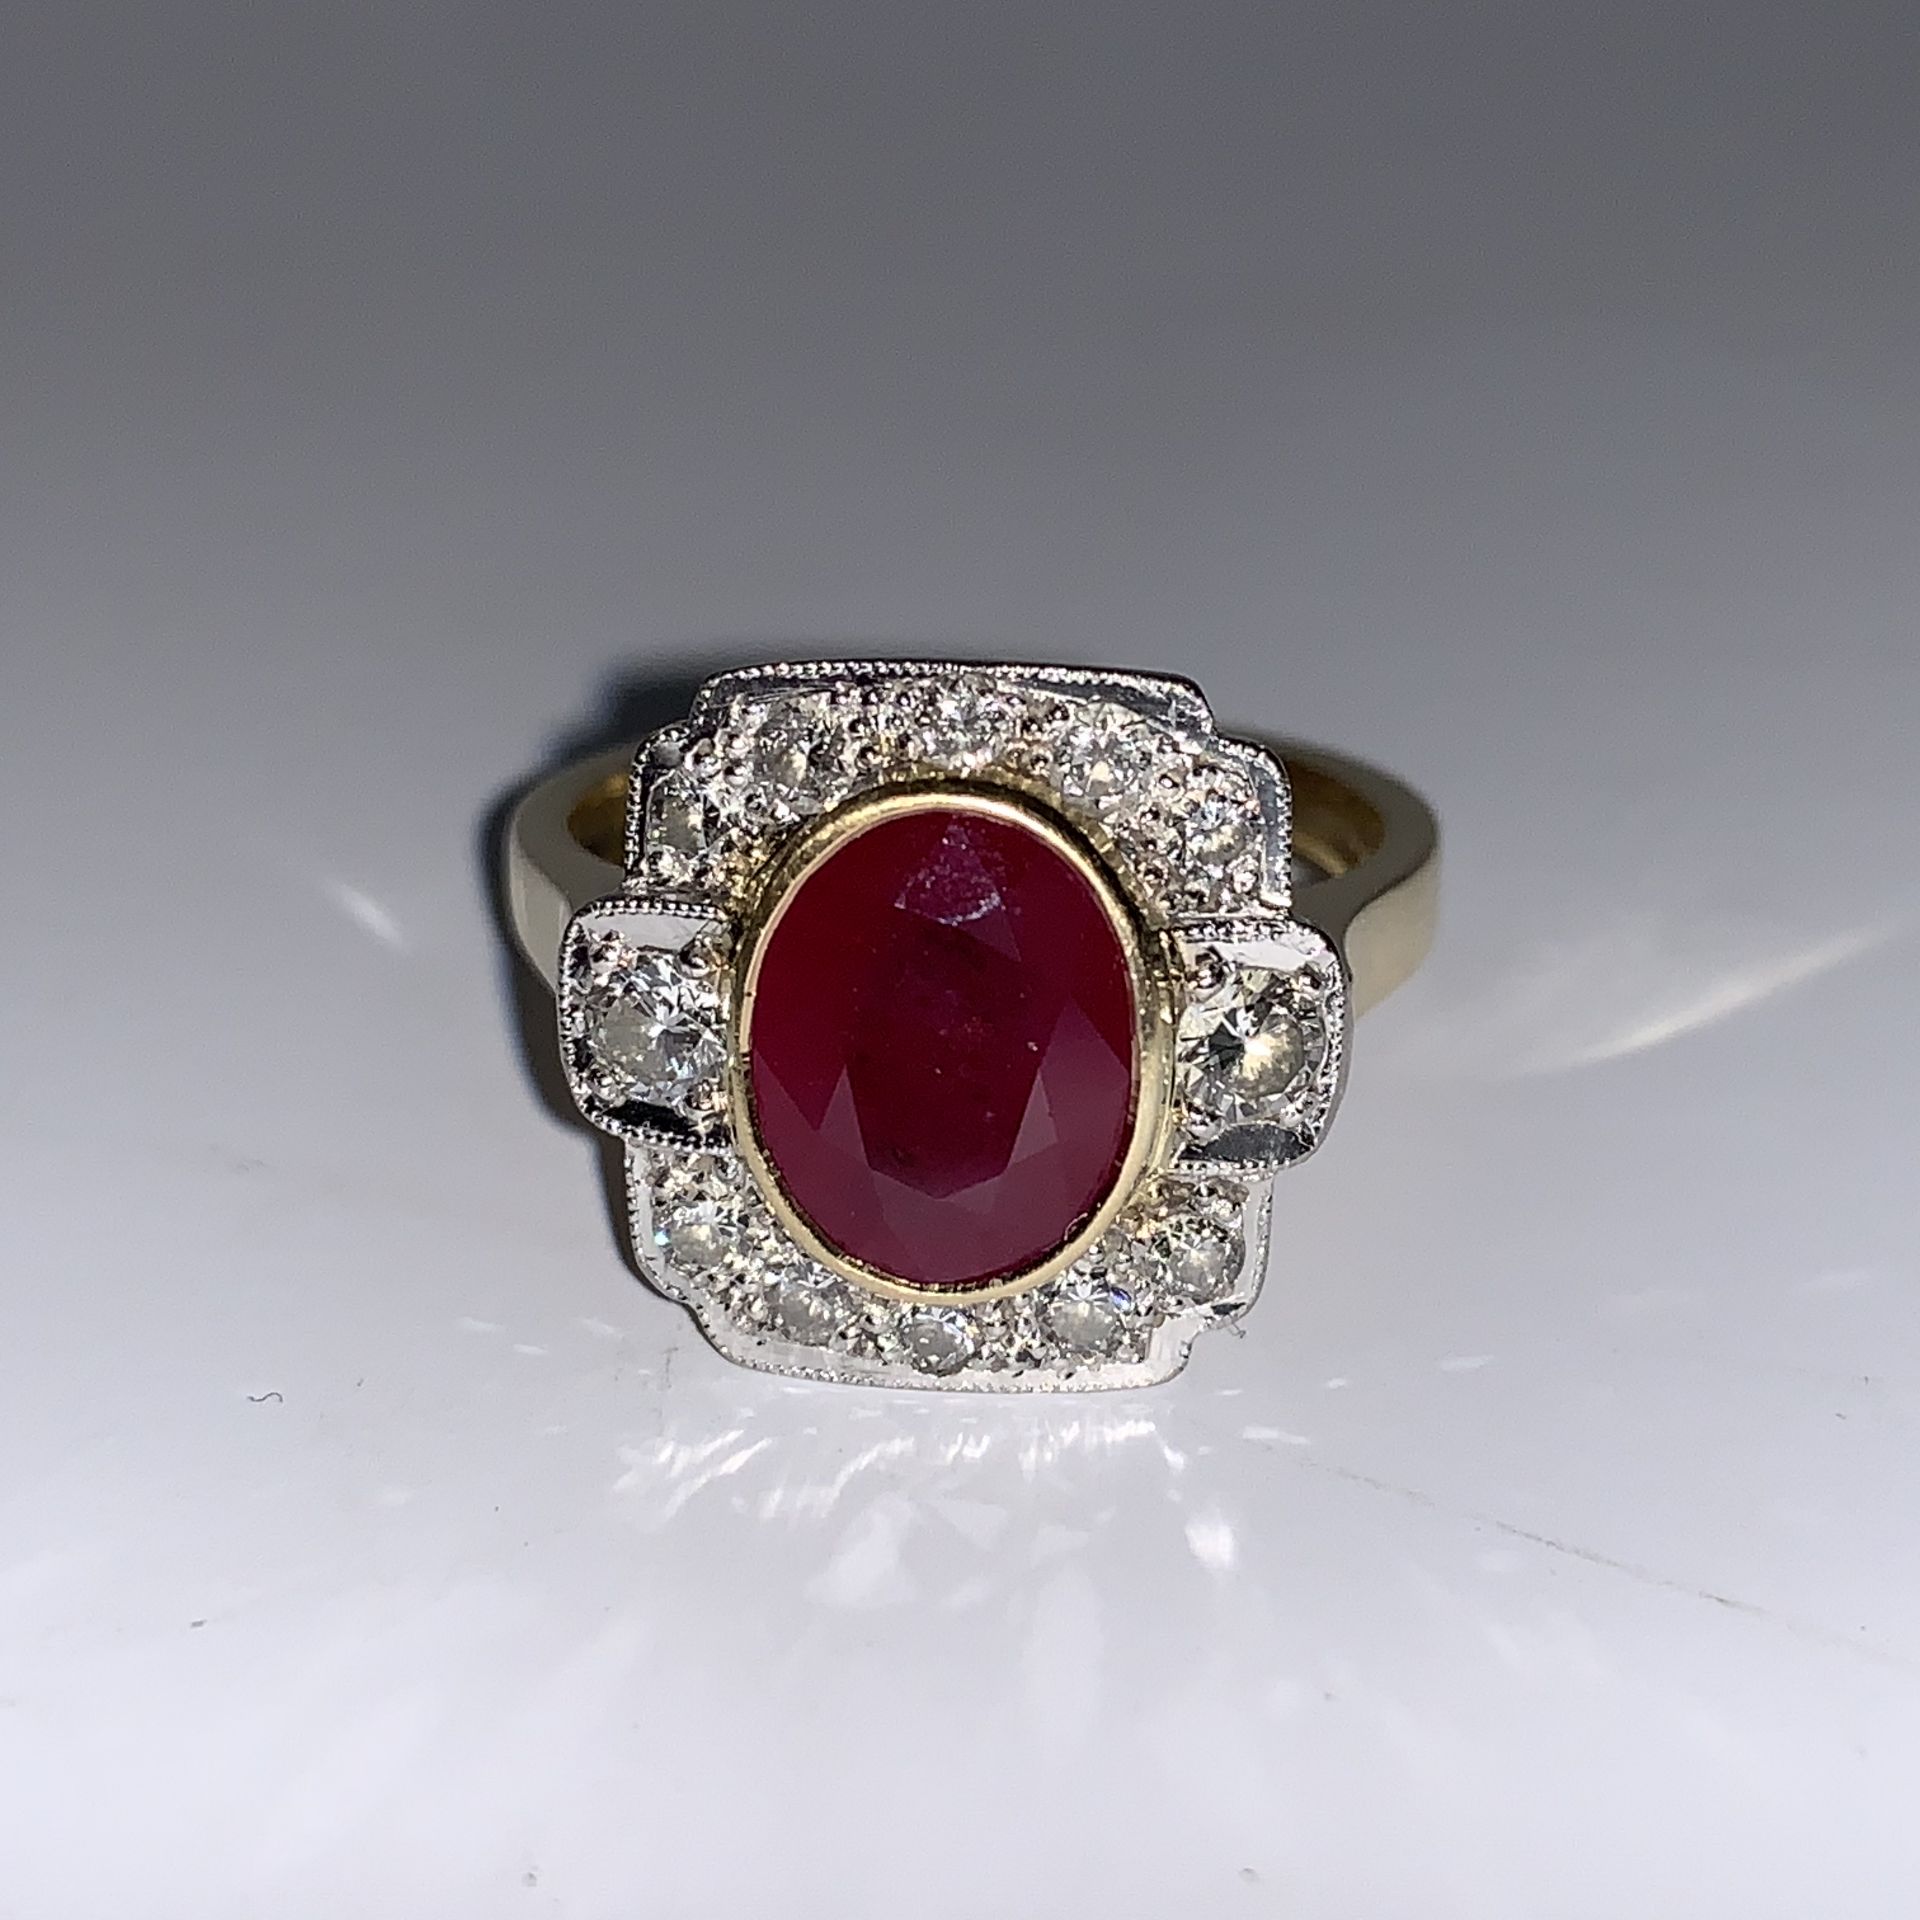 An Art Deco style ruby and diamond ring complete with valuation certificate which details the ring